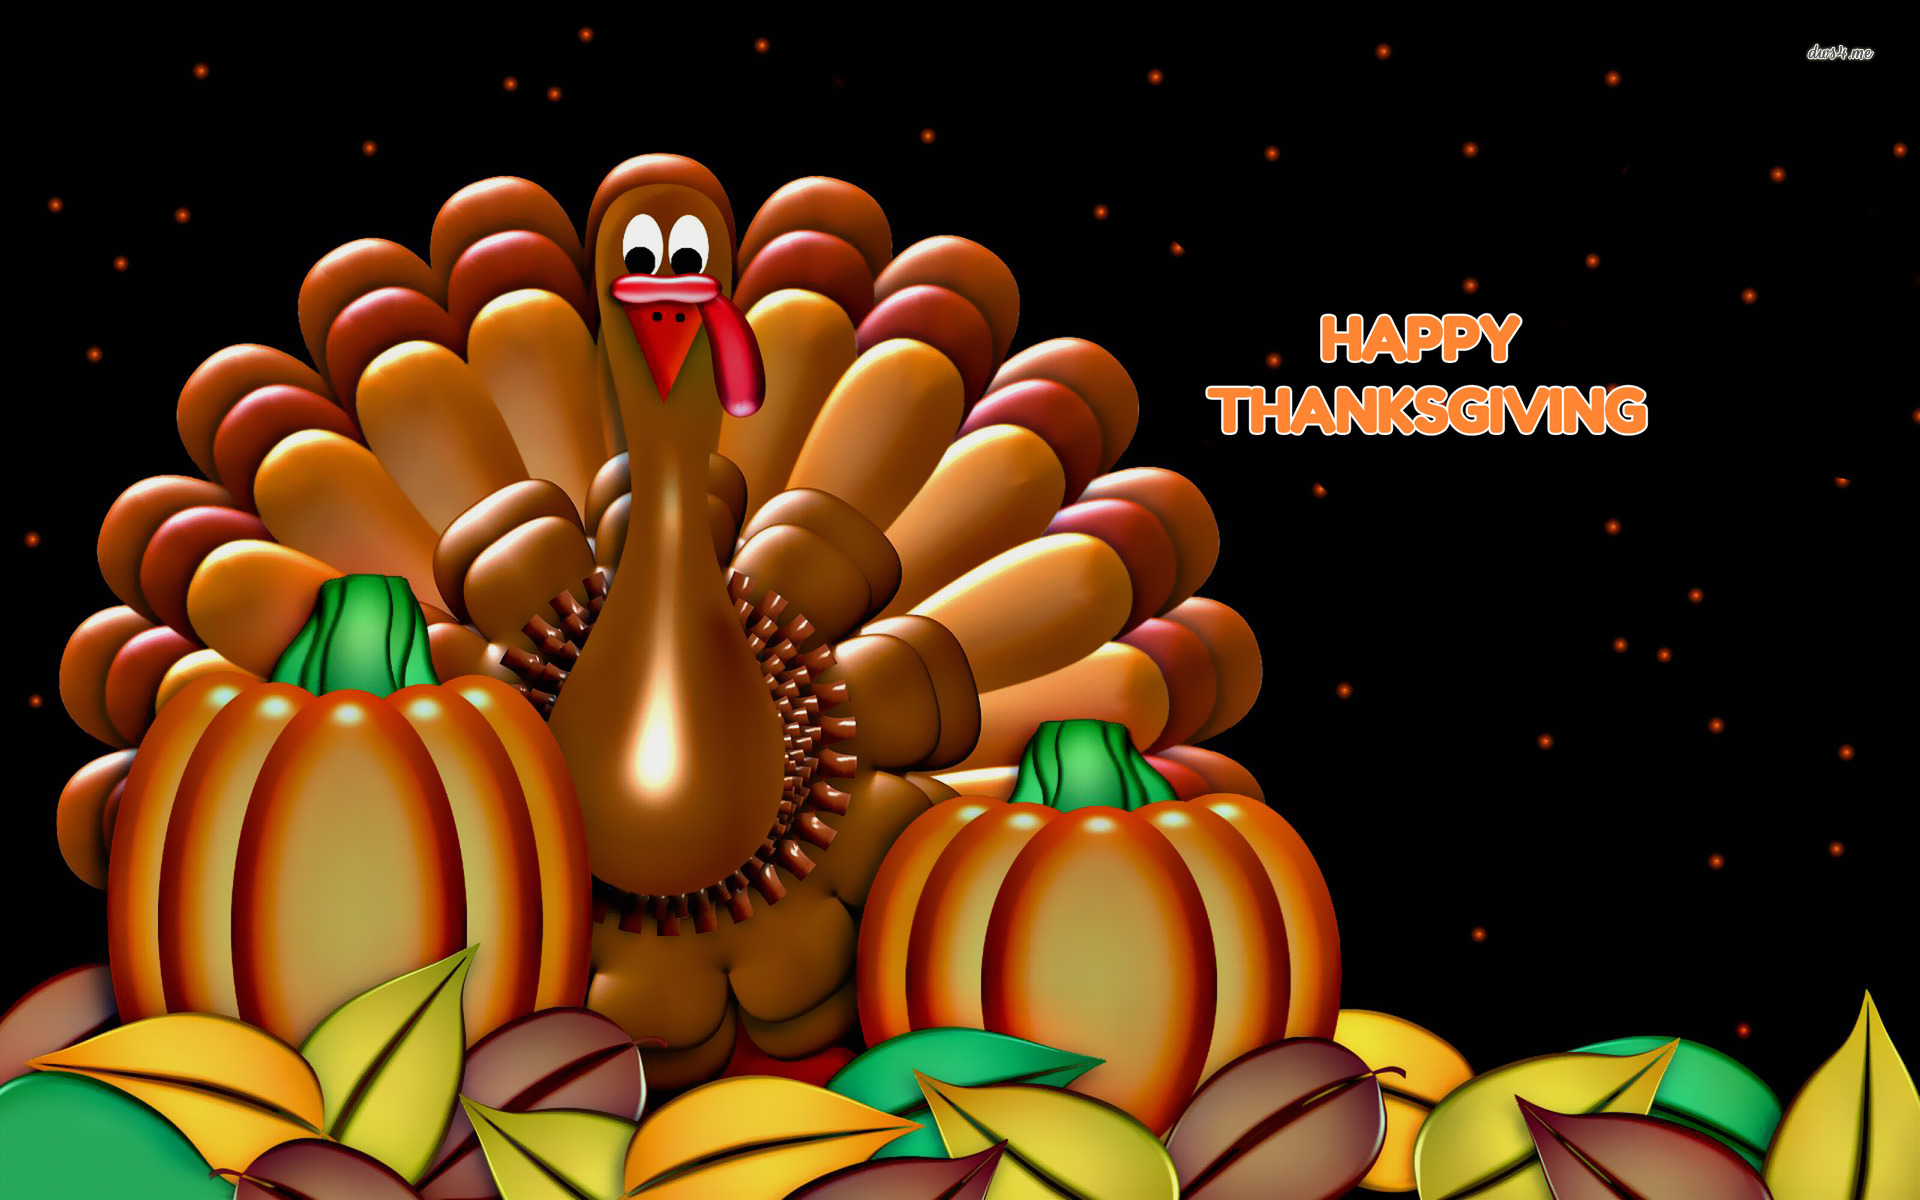 Happy Thanksgiving wallpaper   Holiday wallpapers   4689